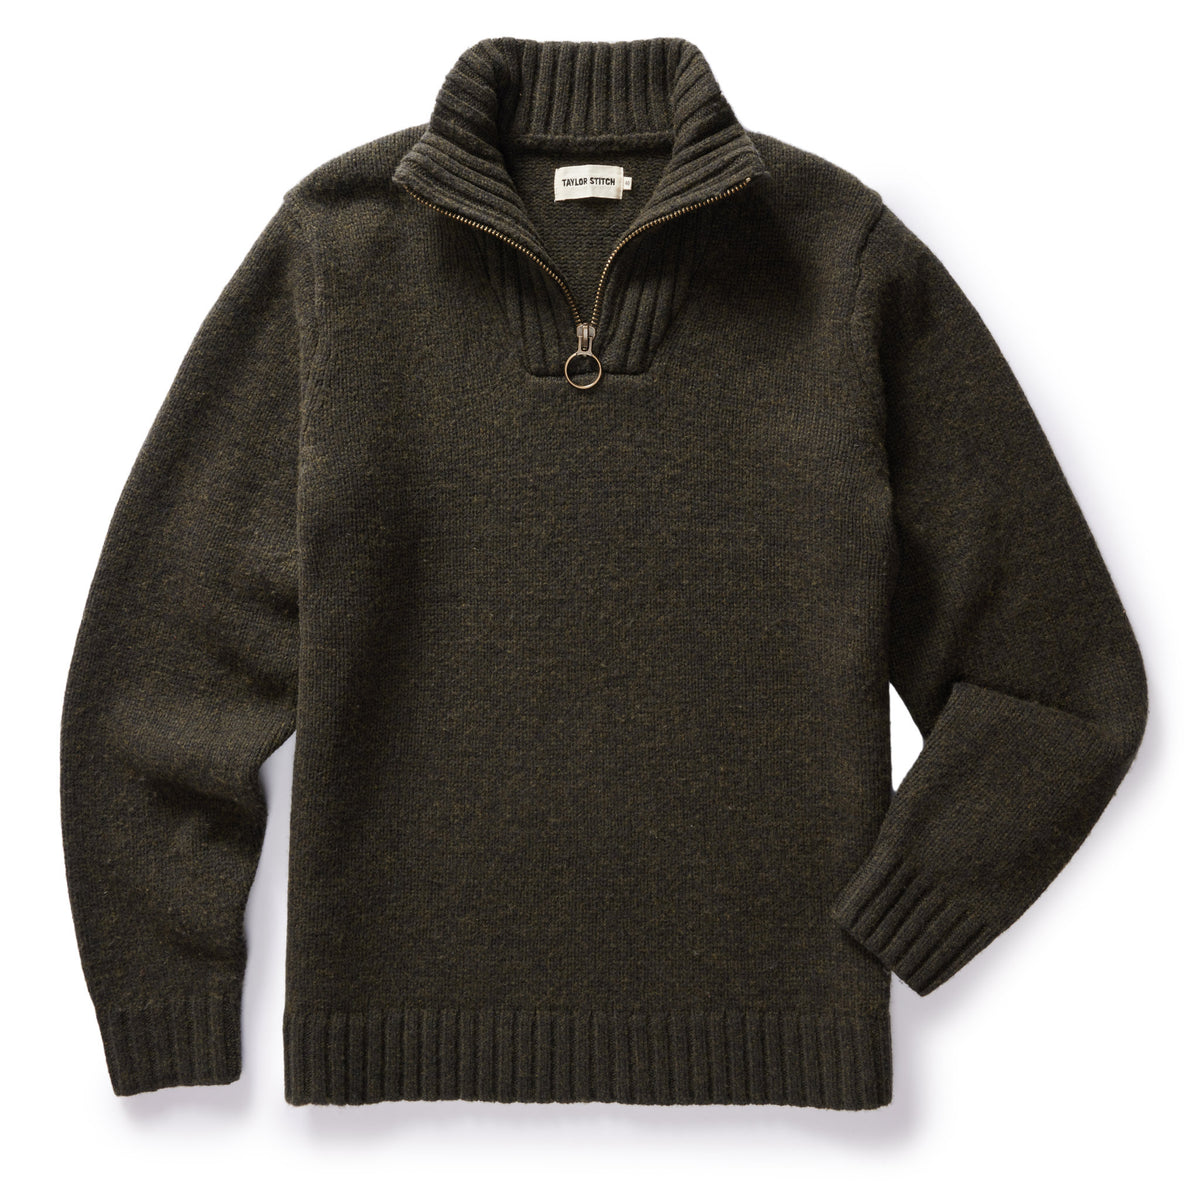 The Quarter Zip Tanker Sweater in Loden | Taylor Stitch